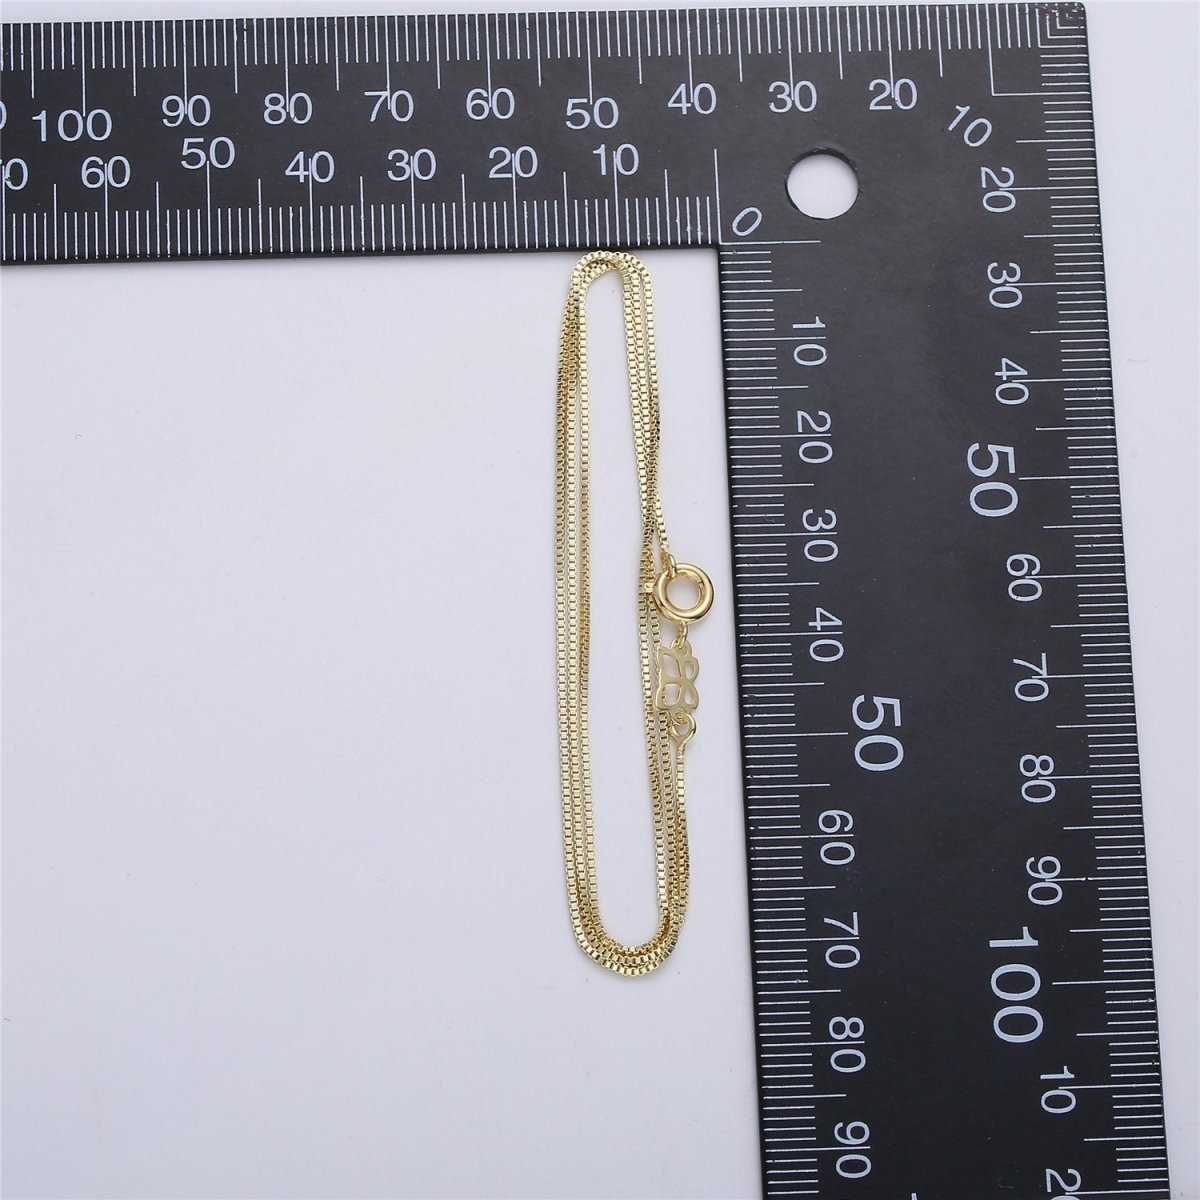 Dainty Gold Everyday Necklace / 14k Gold Plated Chain Necklace / 18 inch Dainty Box Chain Necklace / Minimal Jewelry / Everyday Necklace 1mm Width | CN-533 Clearance Pricing - DLUXCA